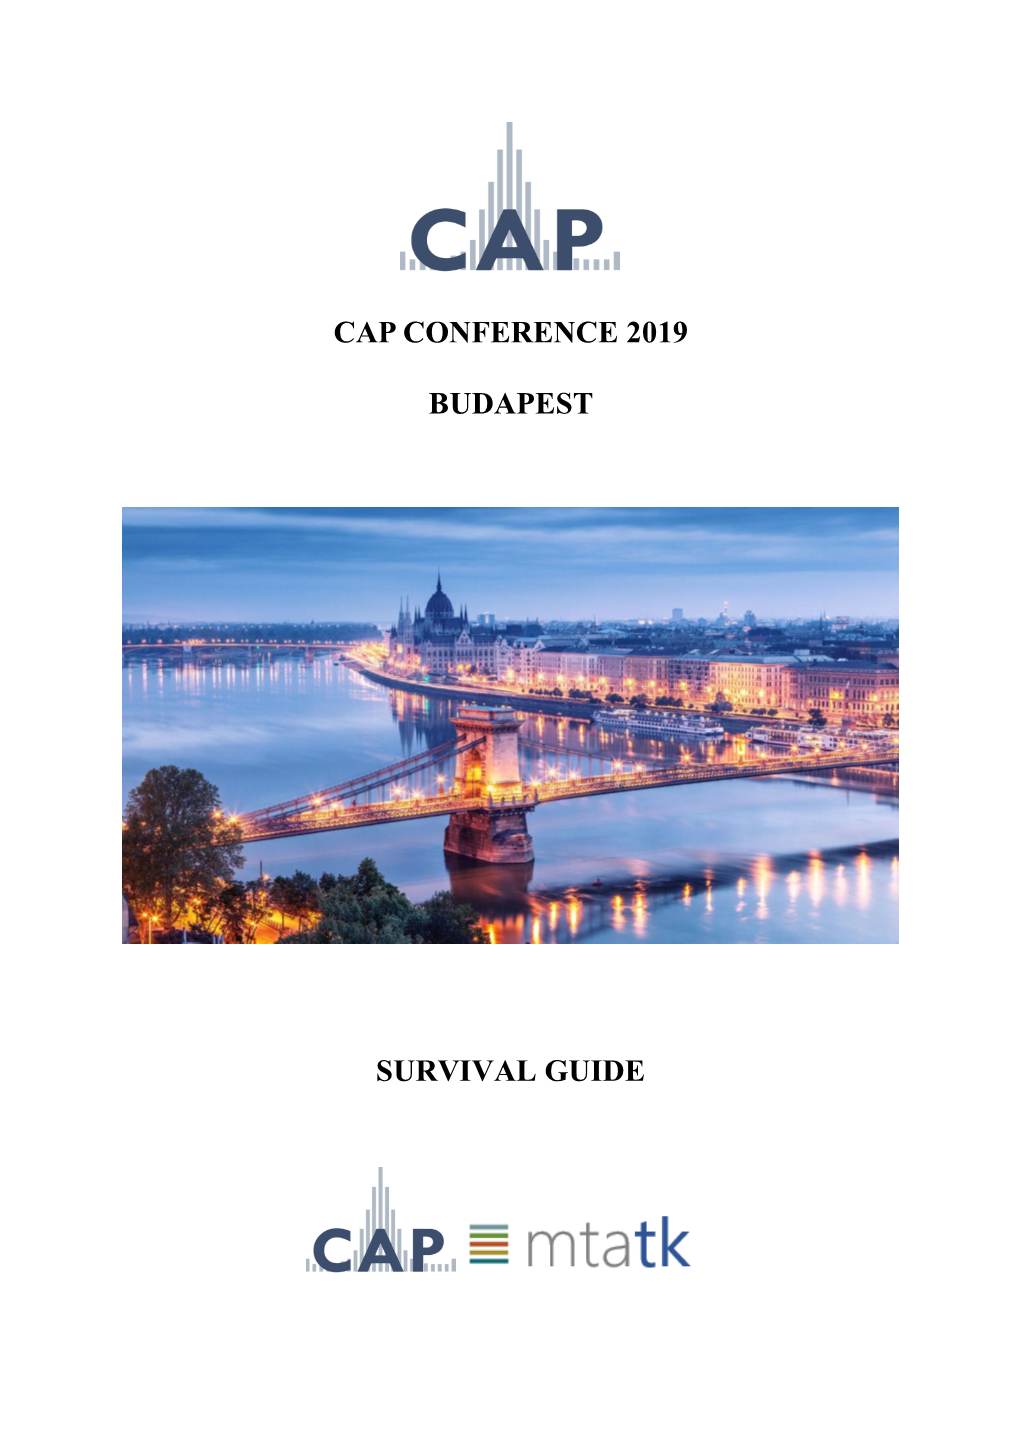 Cap Conference 2019 Budapest Survival Guide